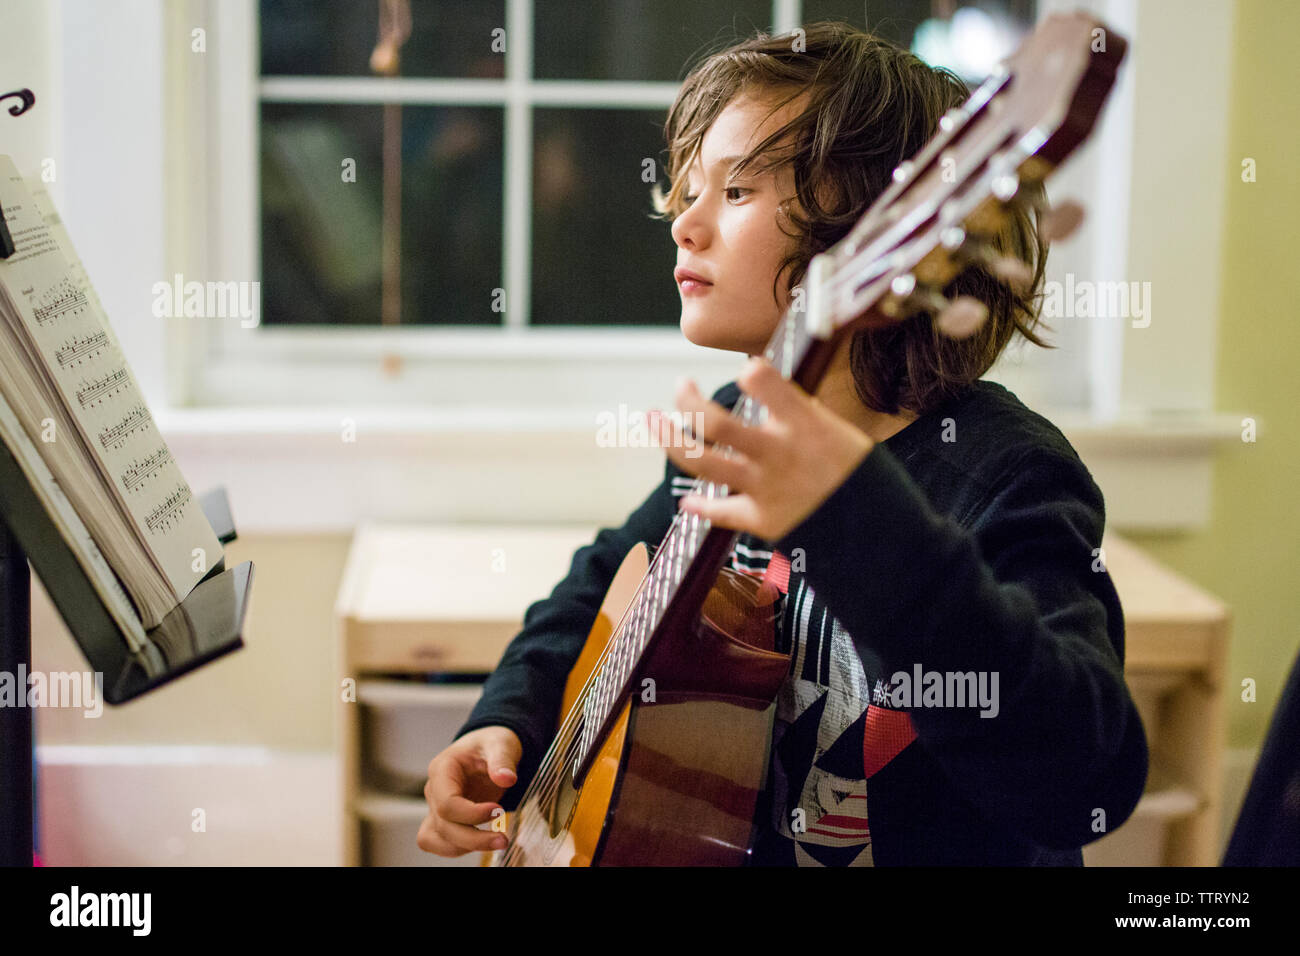 a boy studies sheet music as he practices guitar Stock Photo